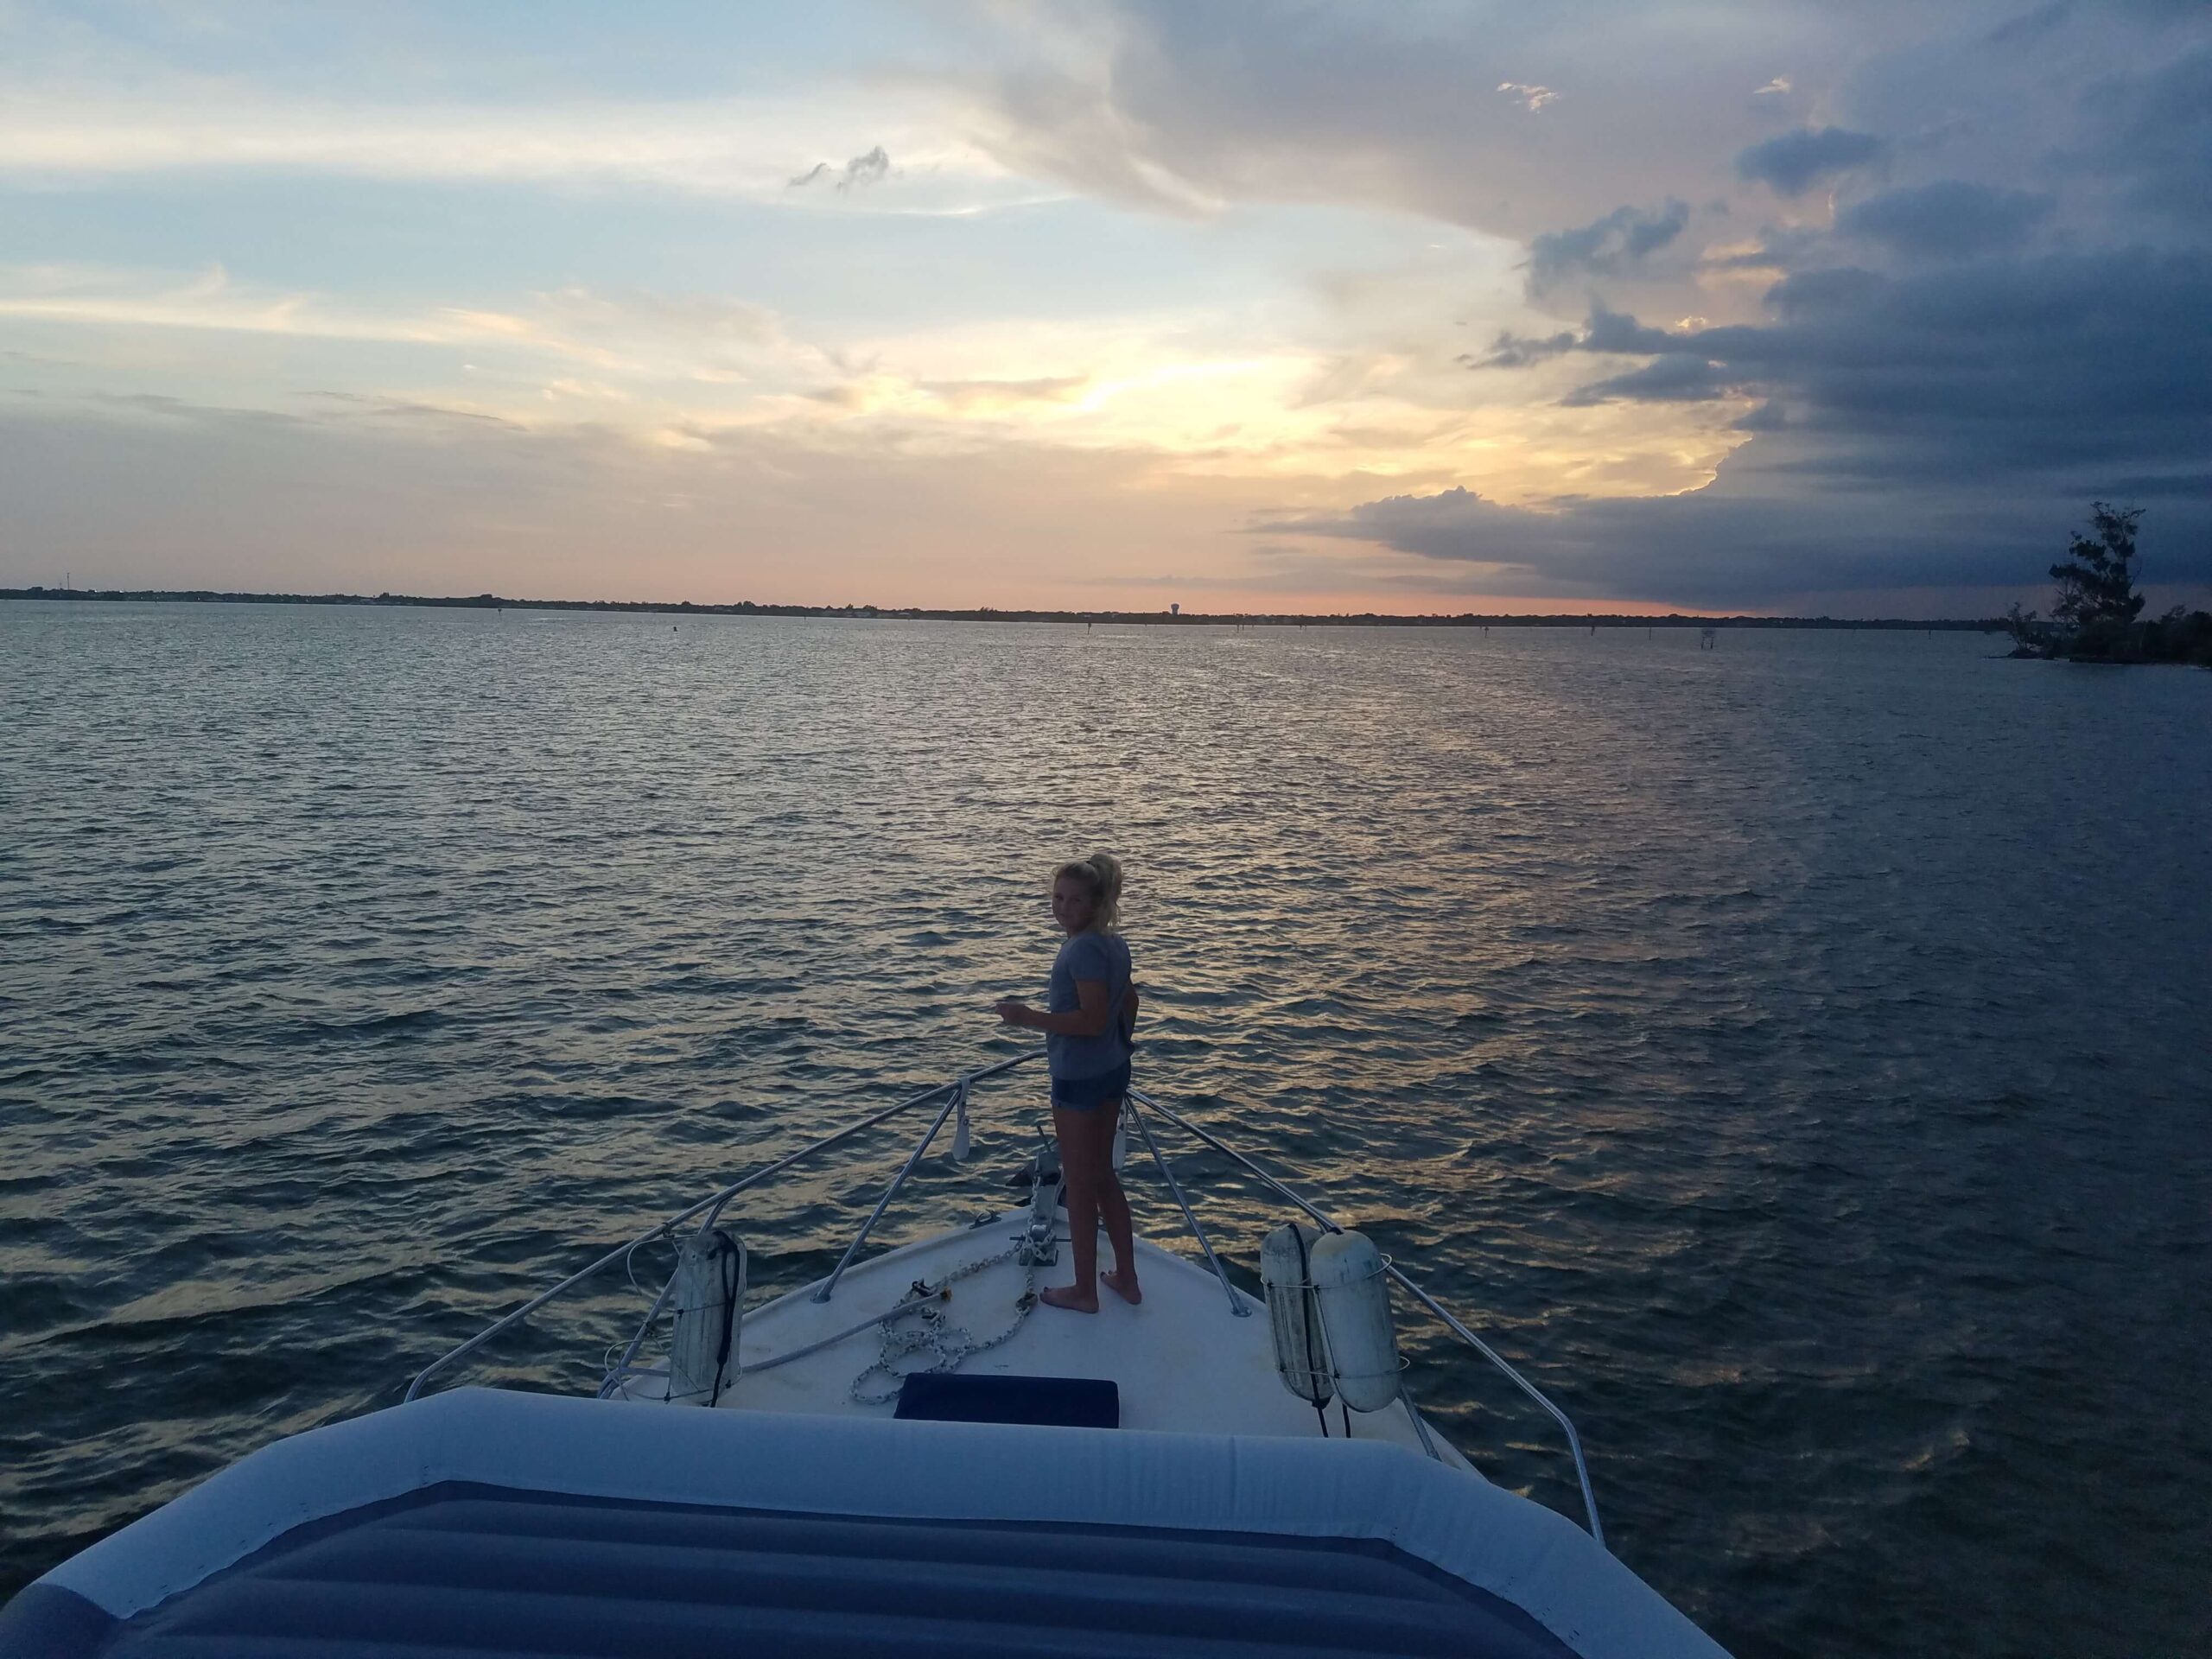 A young girl stands at the front of the boat at sunset